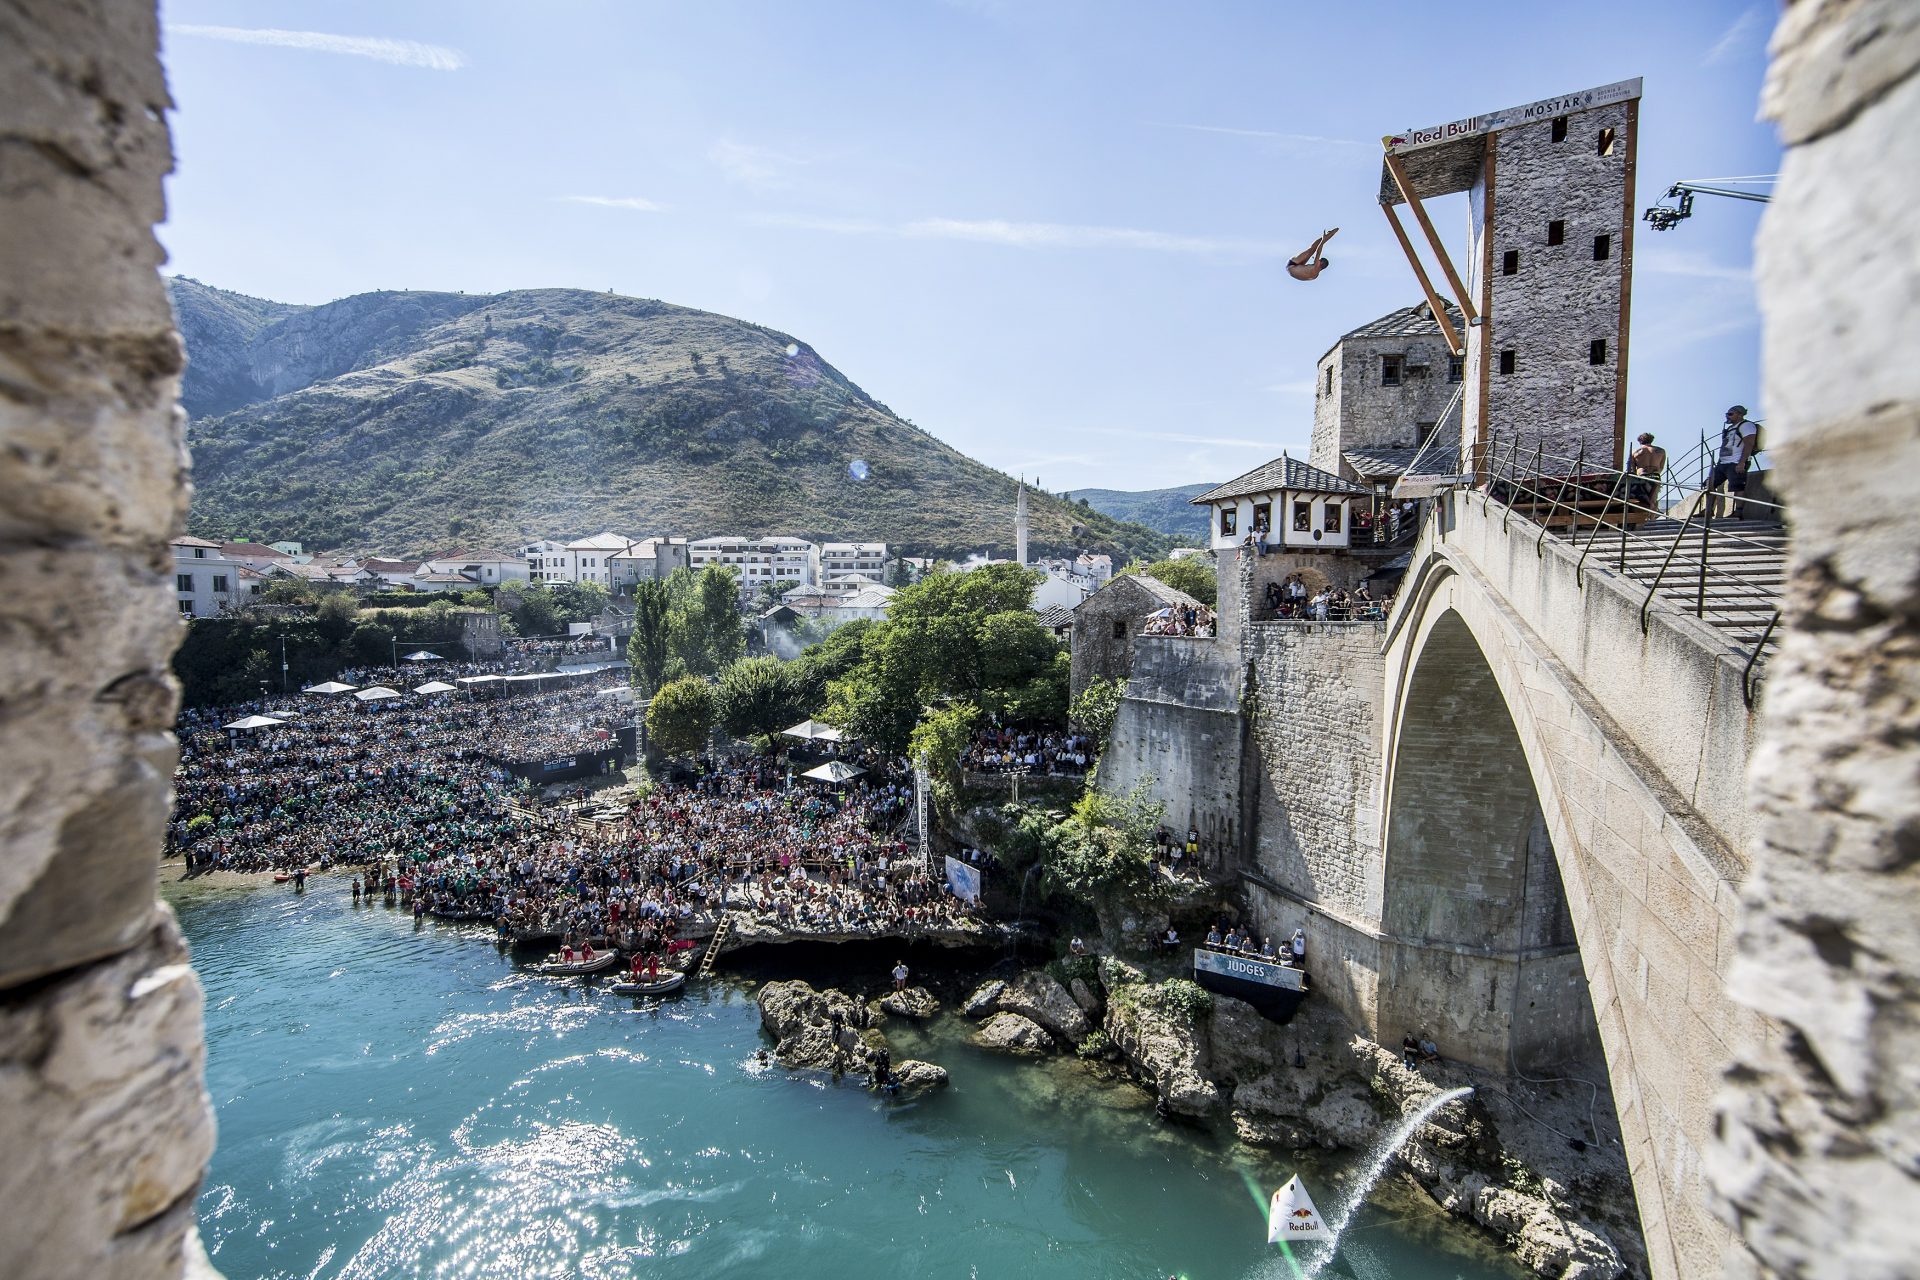 Red Bull Cliff Diving in Mostar on 15th and 16th of September Visit B&H